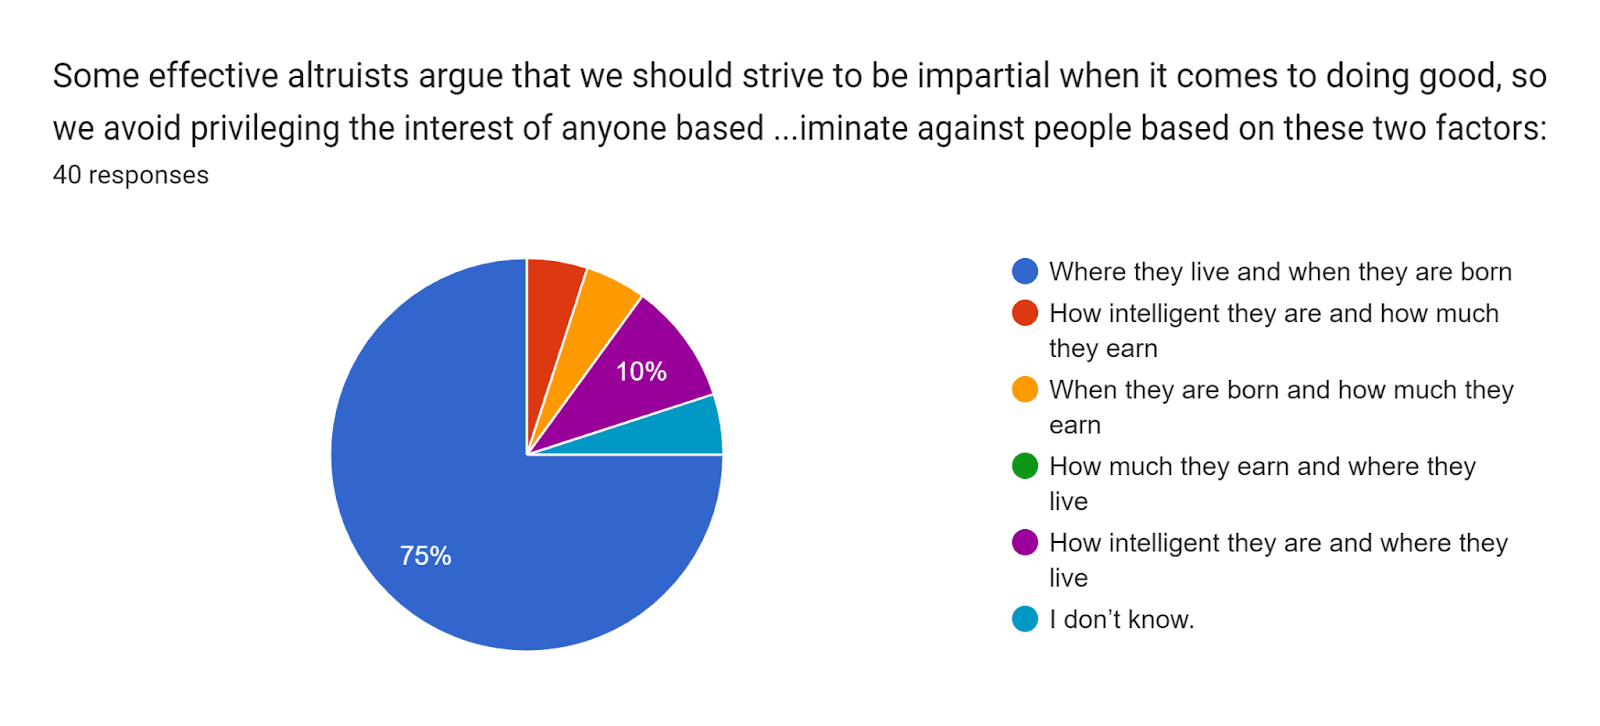 Forms response chart. Question title: Some effective altruists argue that we should strive to be impartial when it comes to doing good, so we avoid privileging the interest of anyone based on arbitrary factors, such as race or gender. They also suggest that we should NOT discriminate against people based on these two factors:. Number of responses: 40 responses.